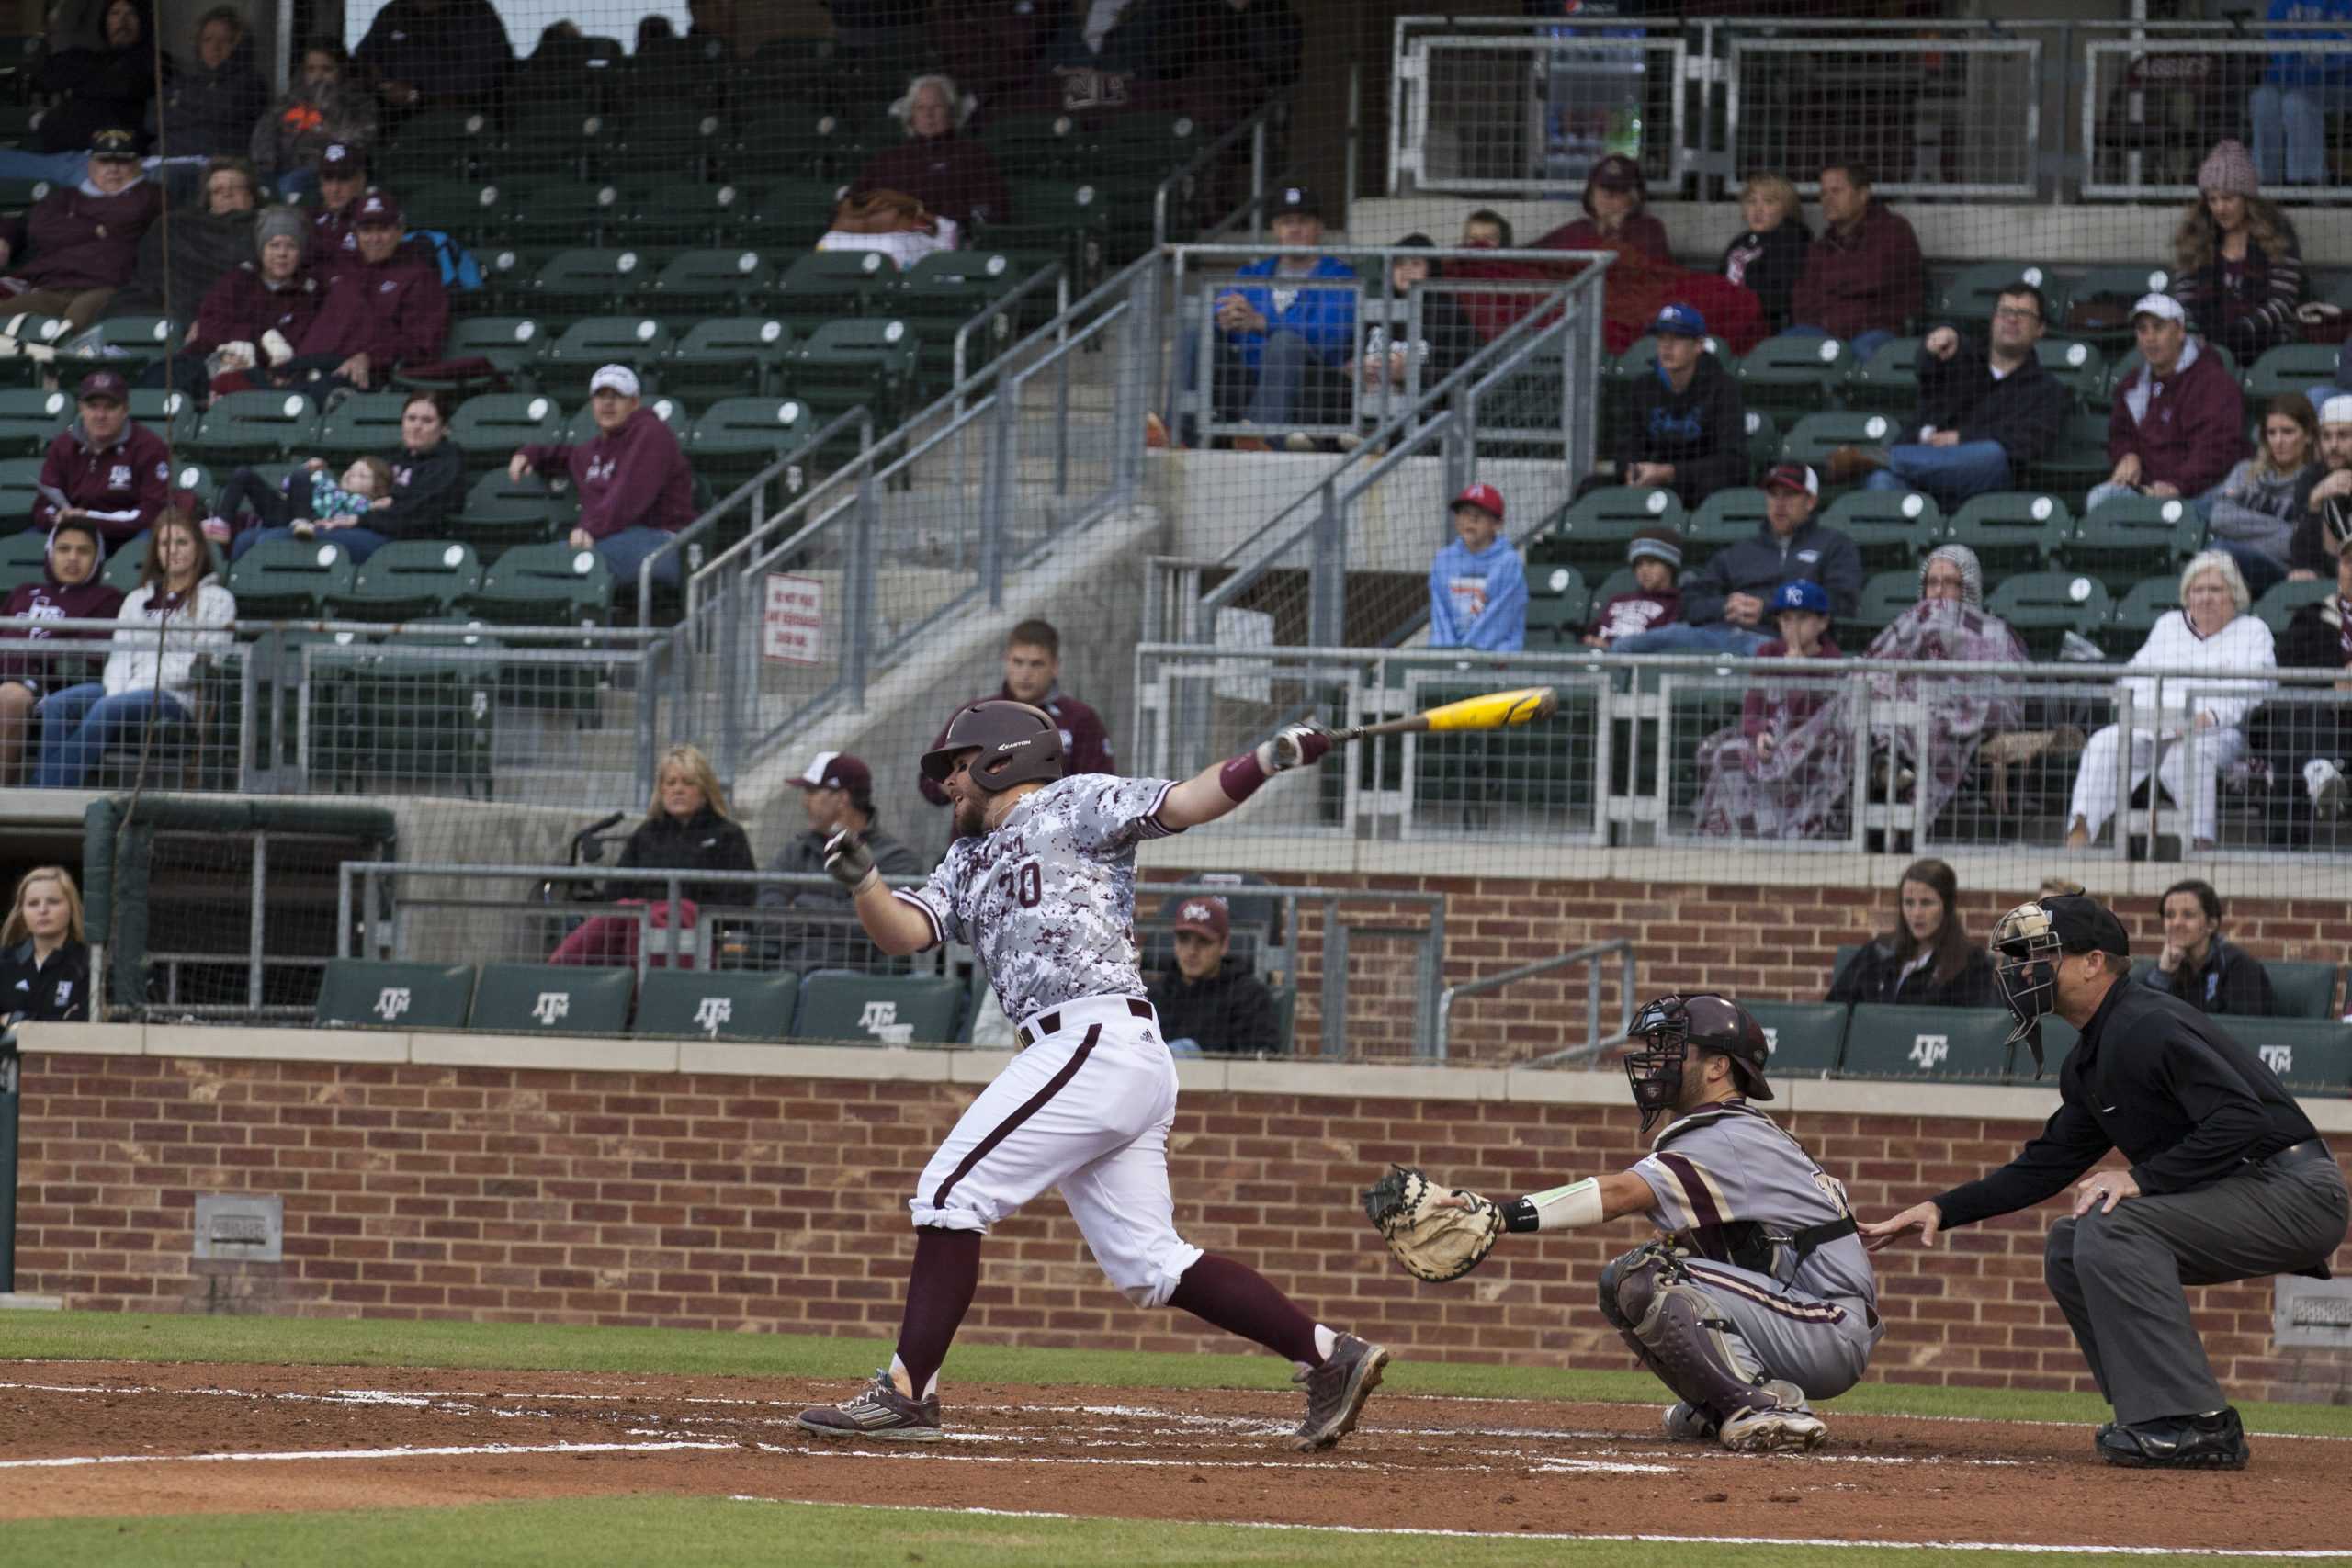 Nottebrok+helps+Aggies+land+on+their+feet+with+walk-off+hit+in+11th+inning